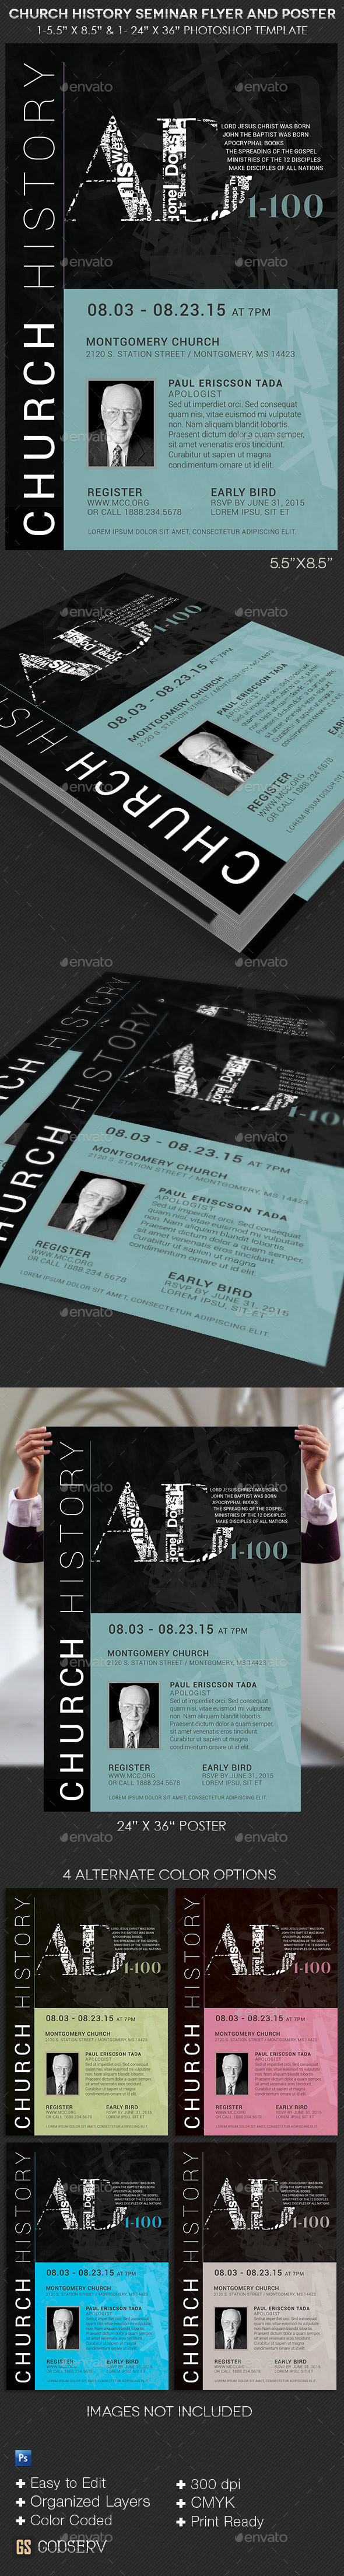 Church history seminar flyer template preview